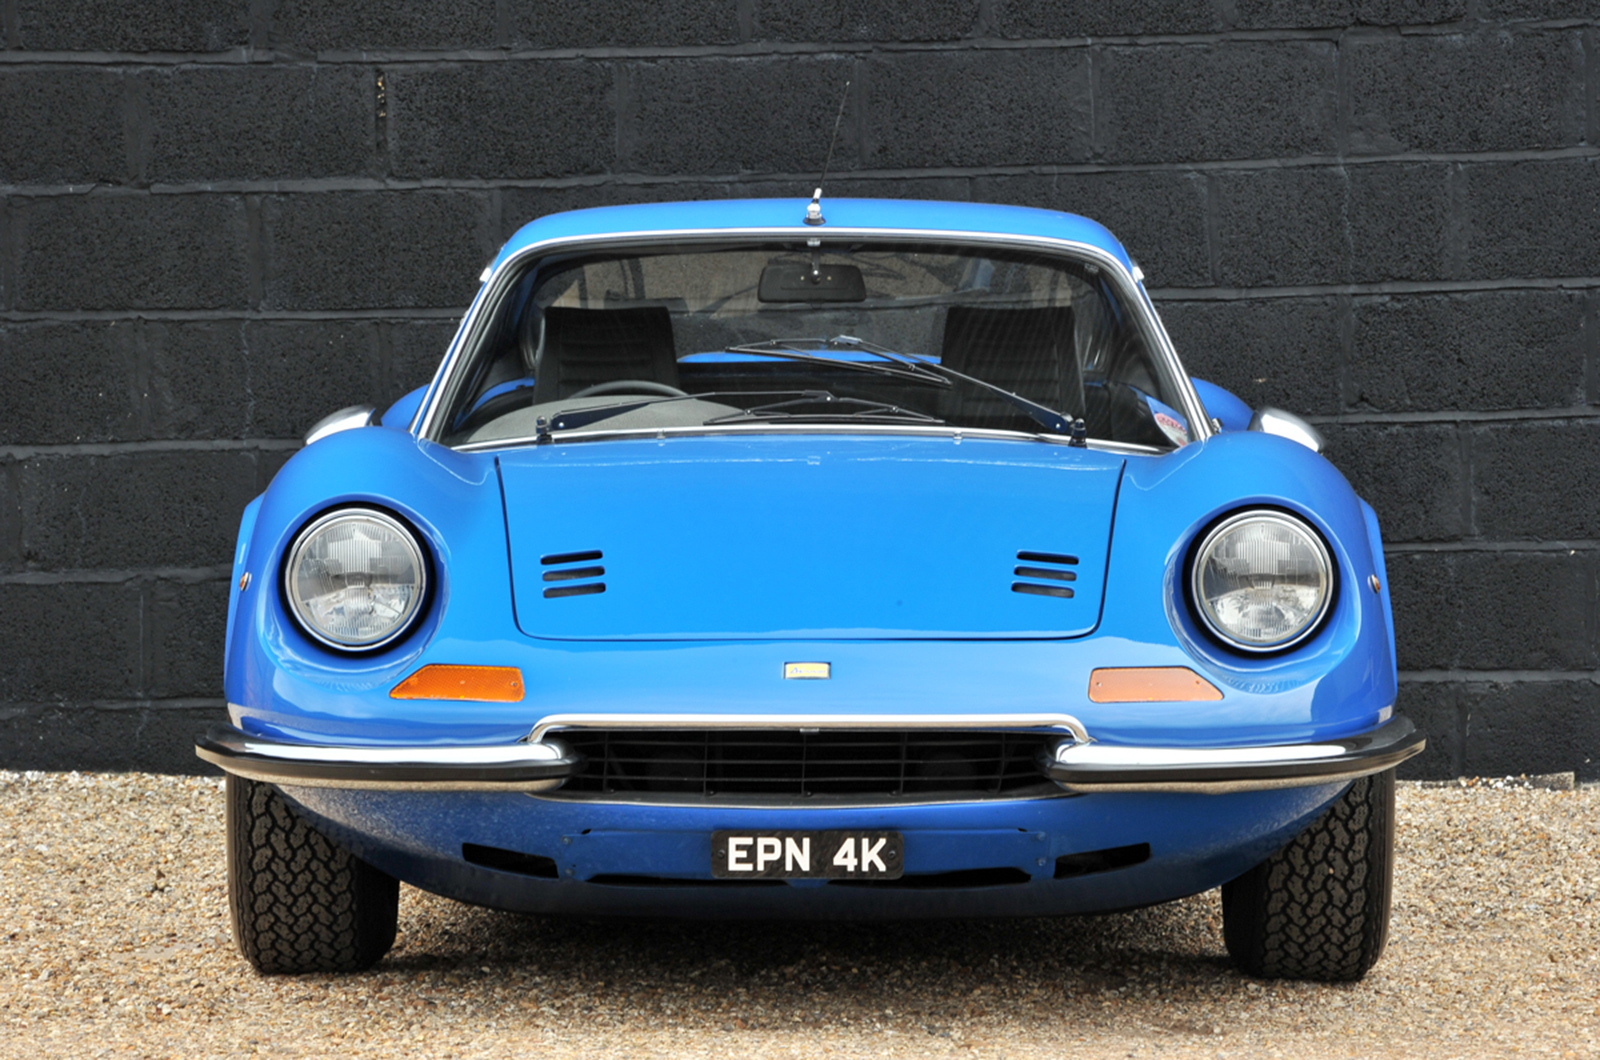 Rare and beautiful Dino heads to Race Retro auction